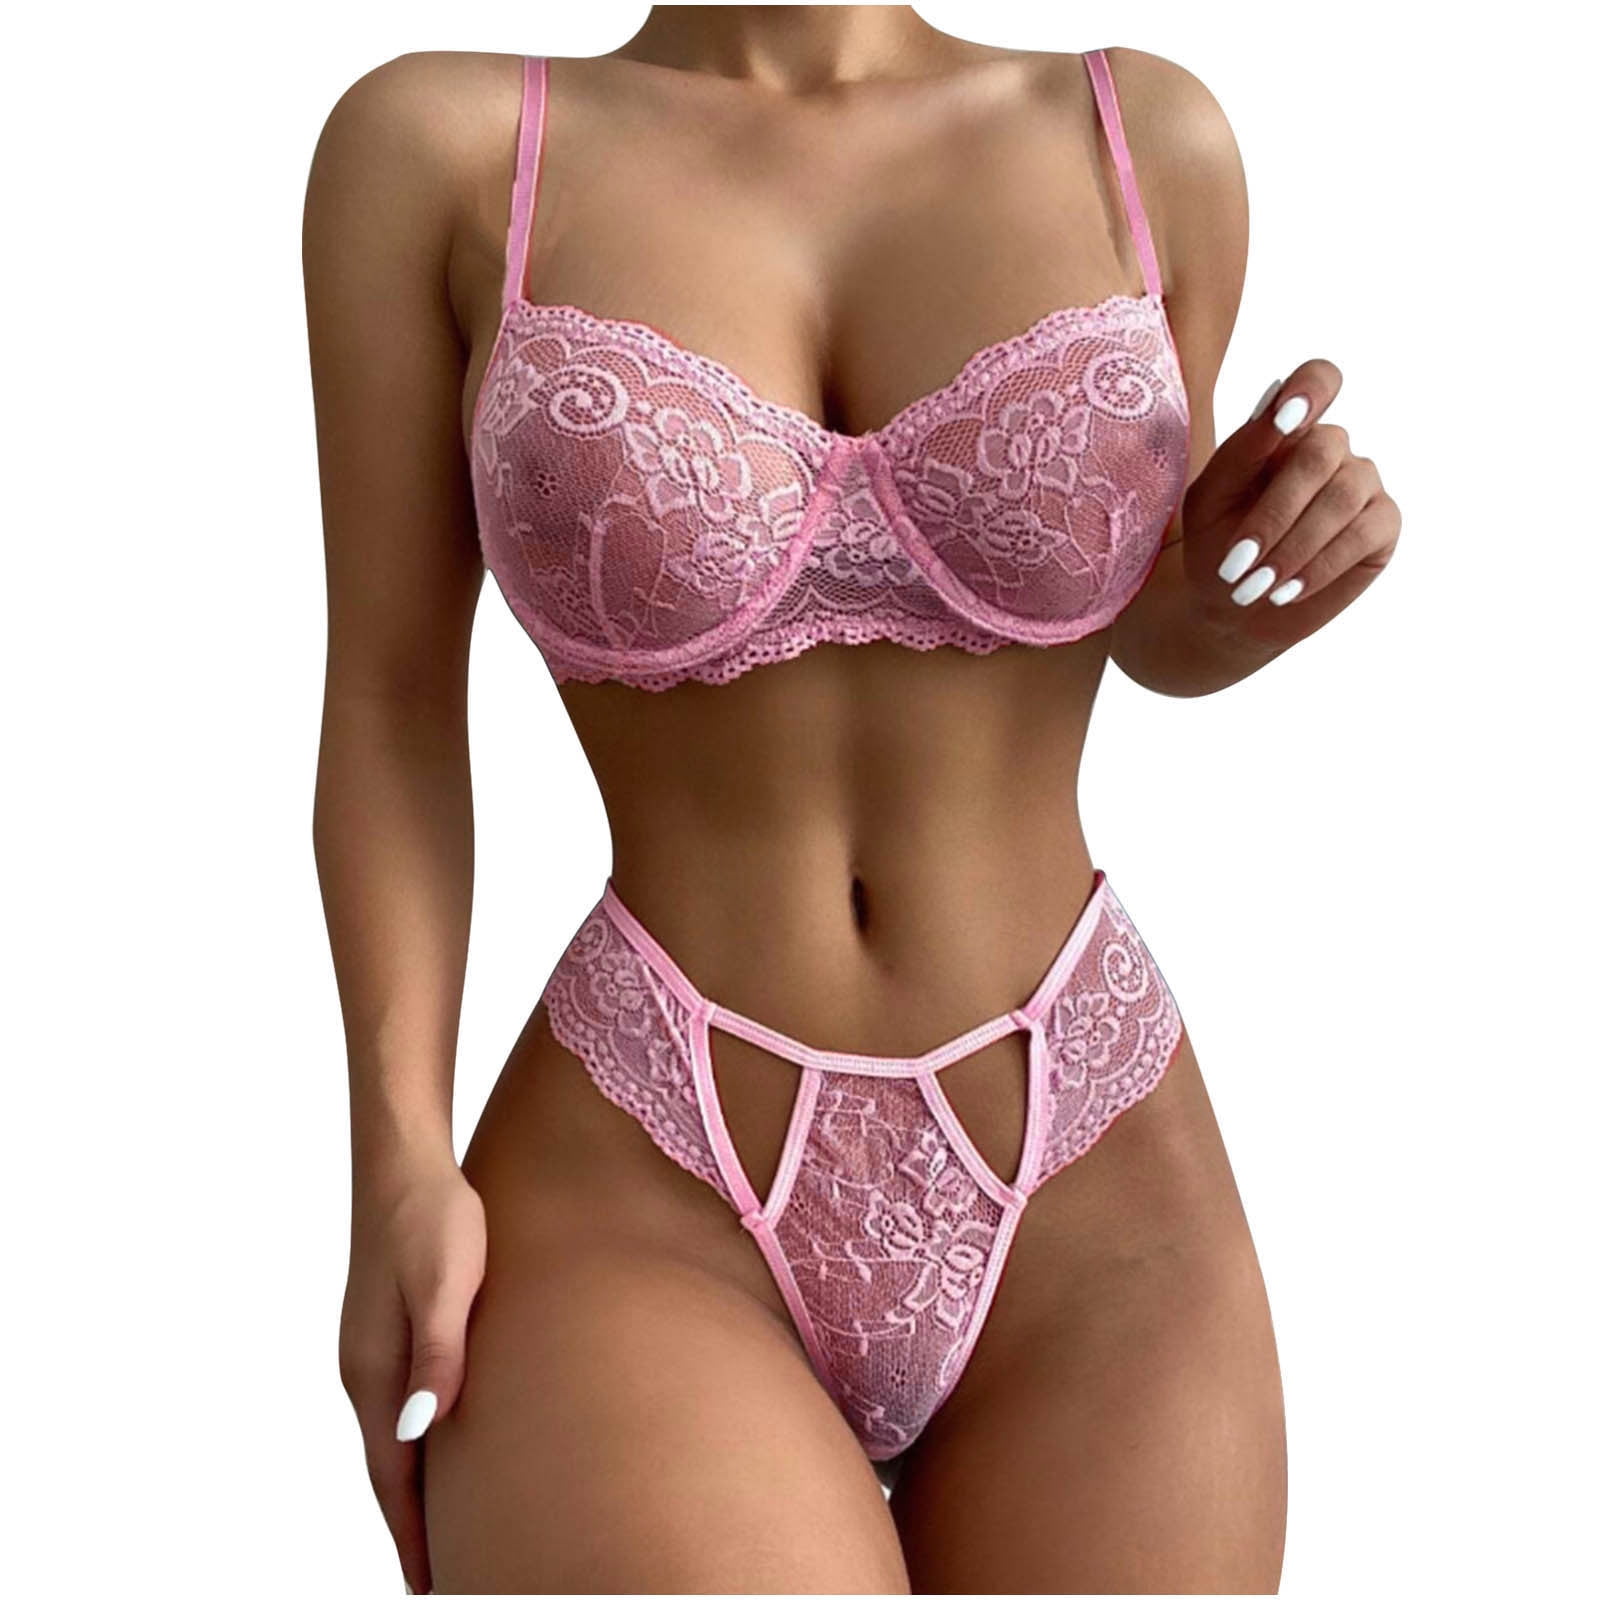 XMMSWDLA Women Lingerie Sexy Sets with Underwire Lace Bra and Panty Set  Push Up Two Piece Lingerie Green S Period Underwear for Teens 